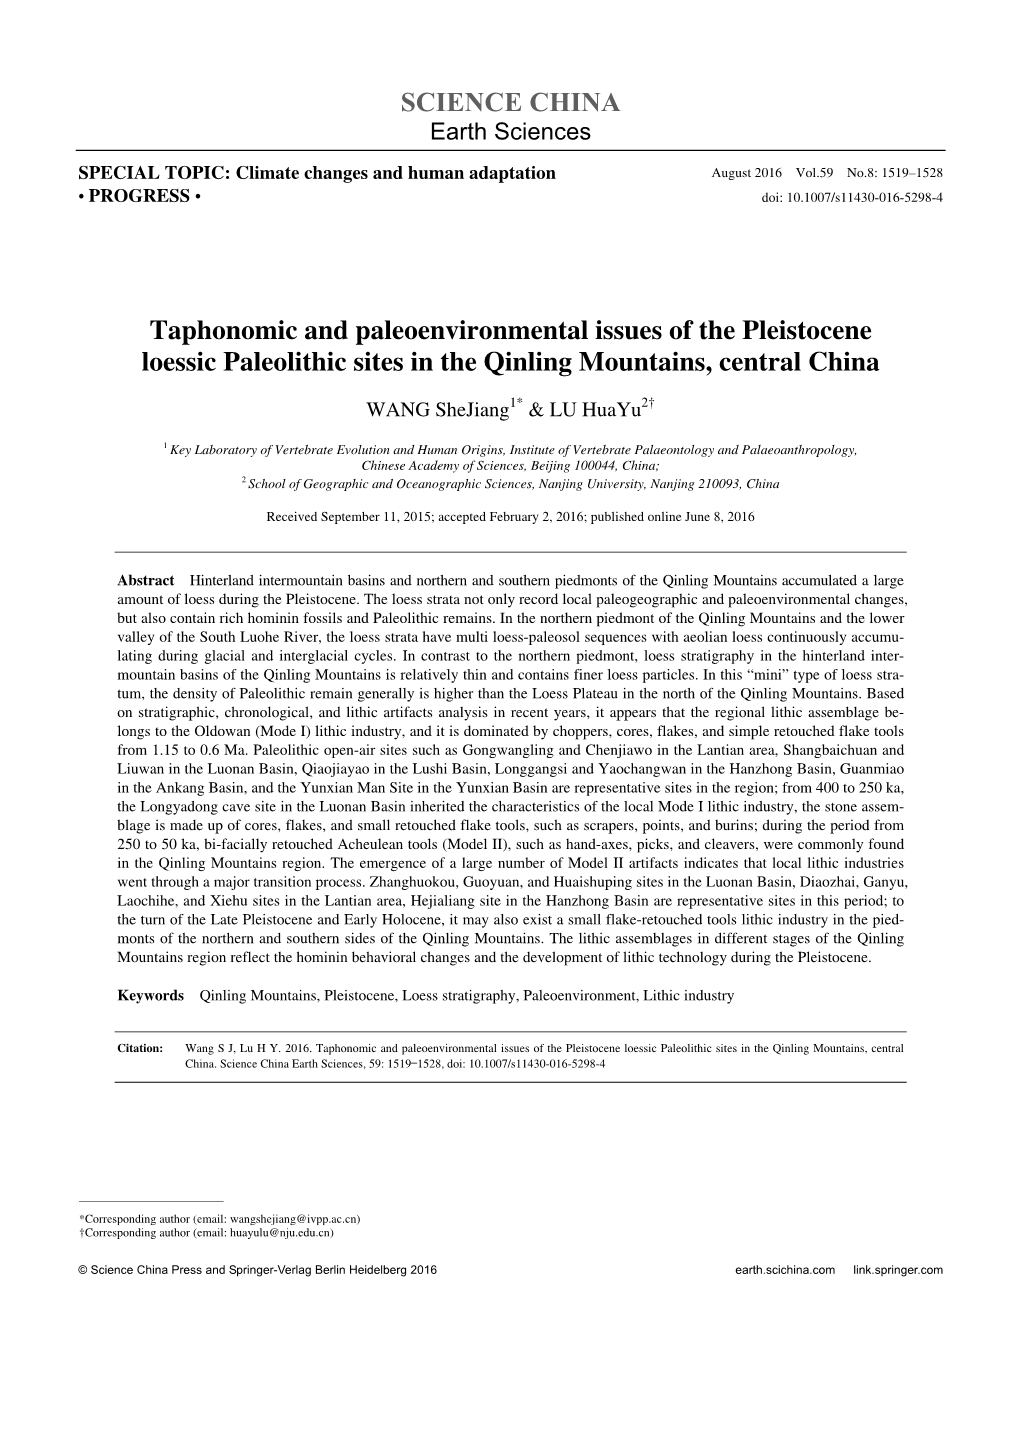 SCIENCE CHINA Taphonomic and Paleoenvironmental Issues of the Pleistocene Loessic Paleolithic Sites in the Qinling Mountains, C